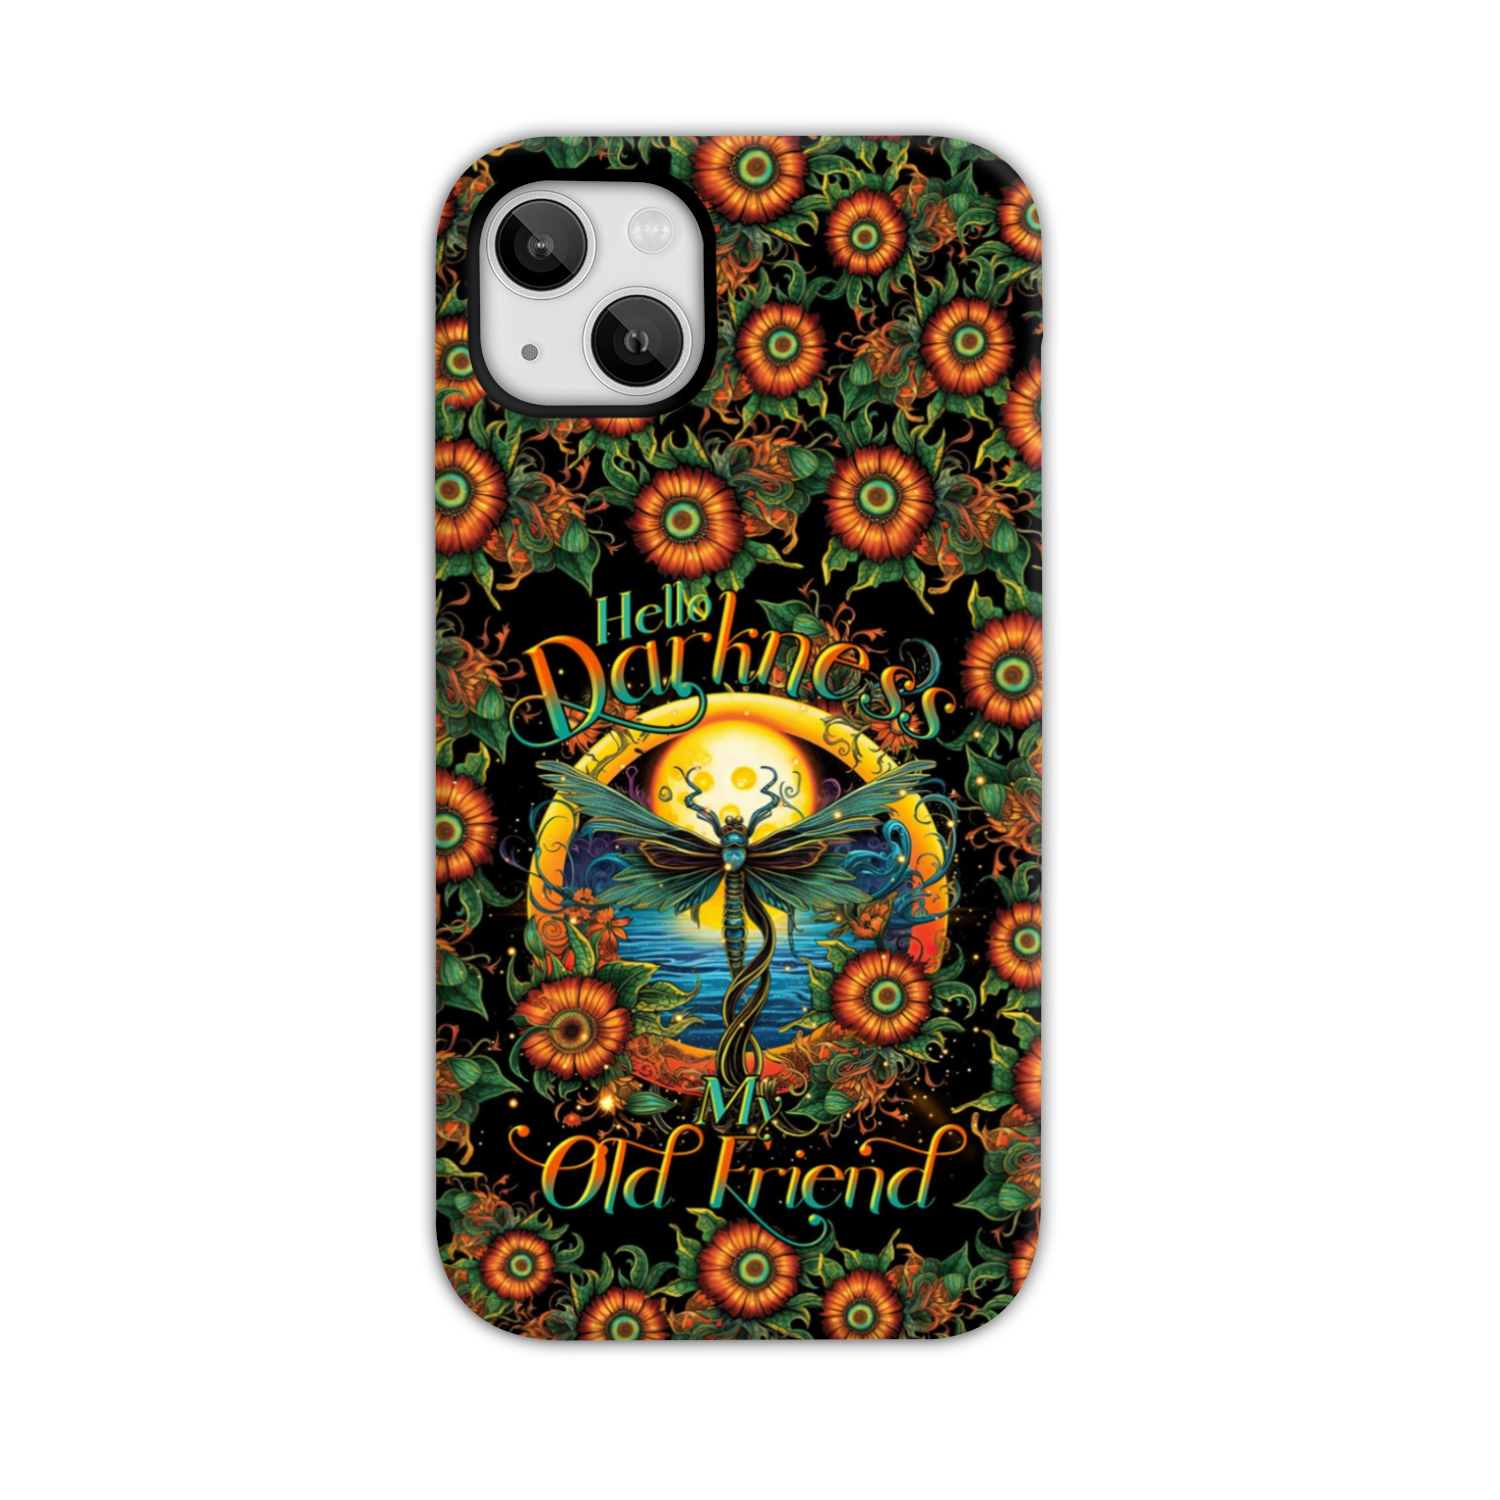 HELLO DARKNESS MY OLD FRIEND DRAGONFLY PHONE CASE - TLTR1007237